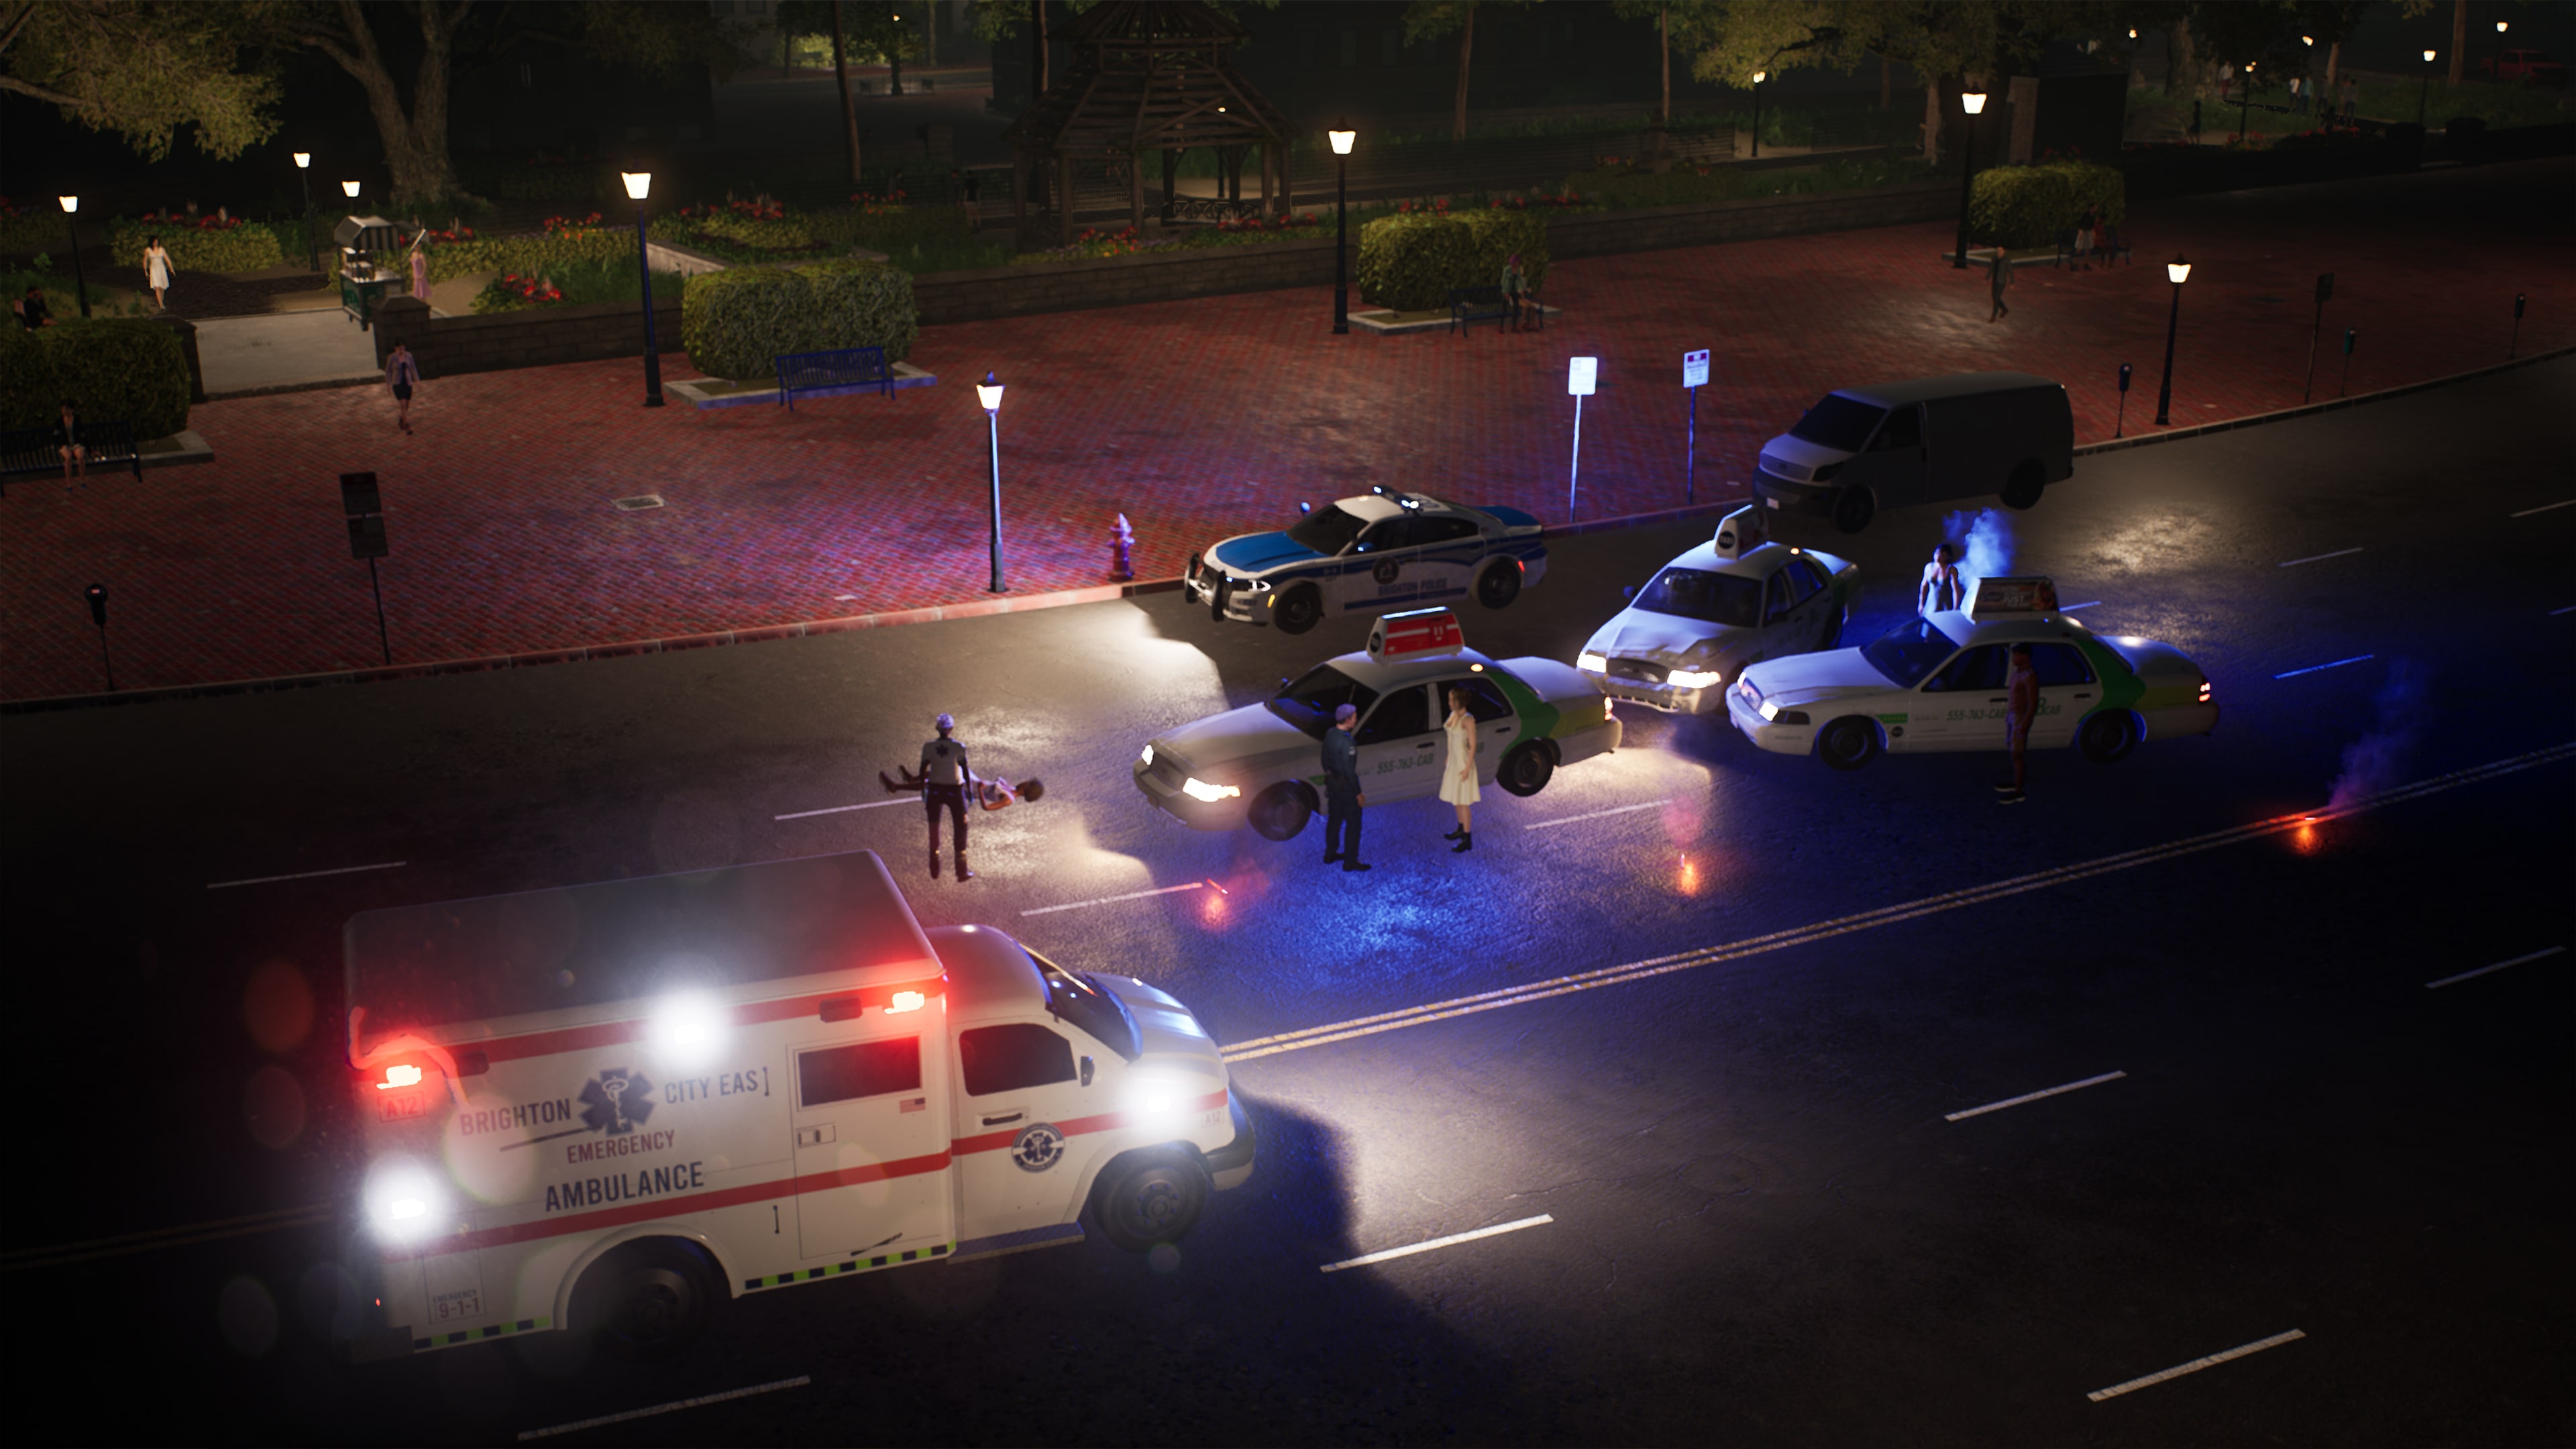 Police Simulator: : DLC Compact Police Officers Patrol Vehicle